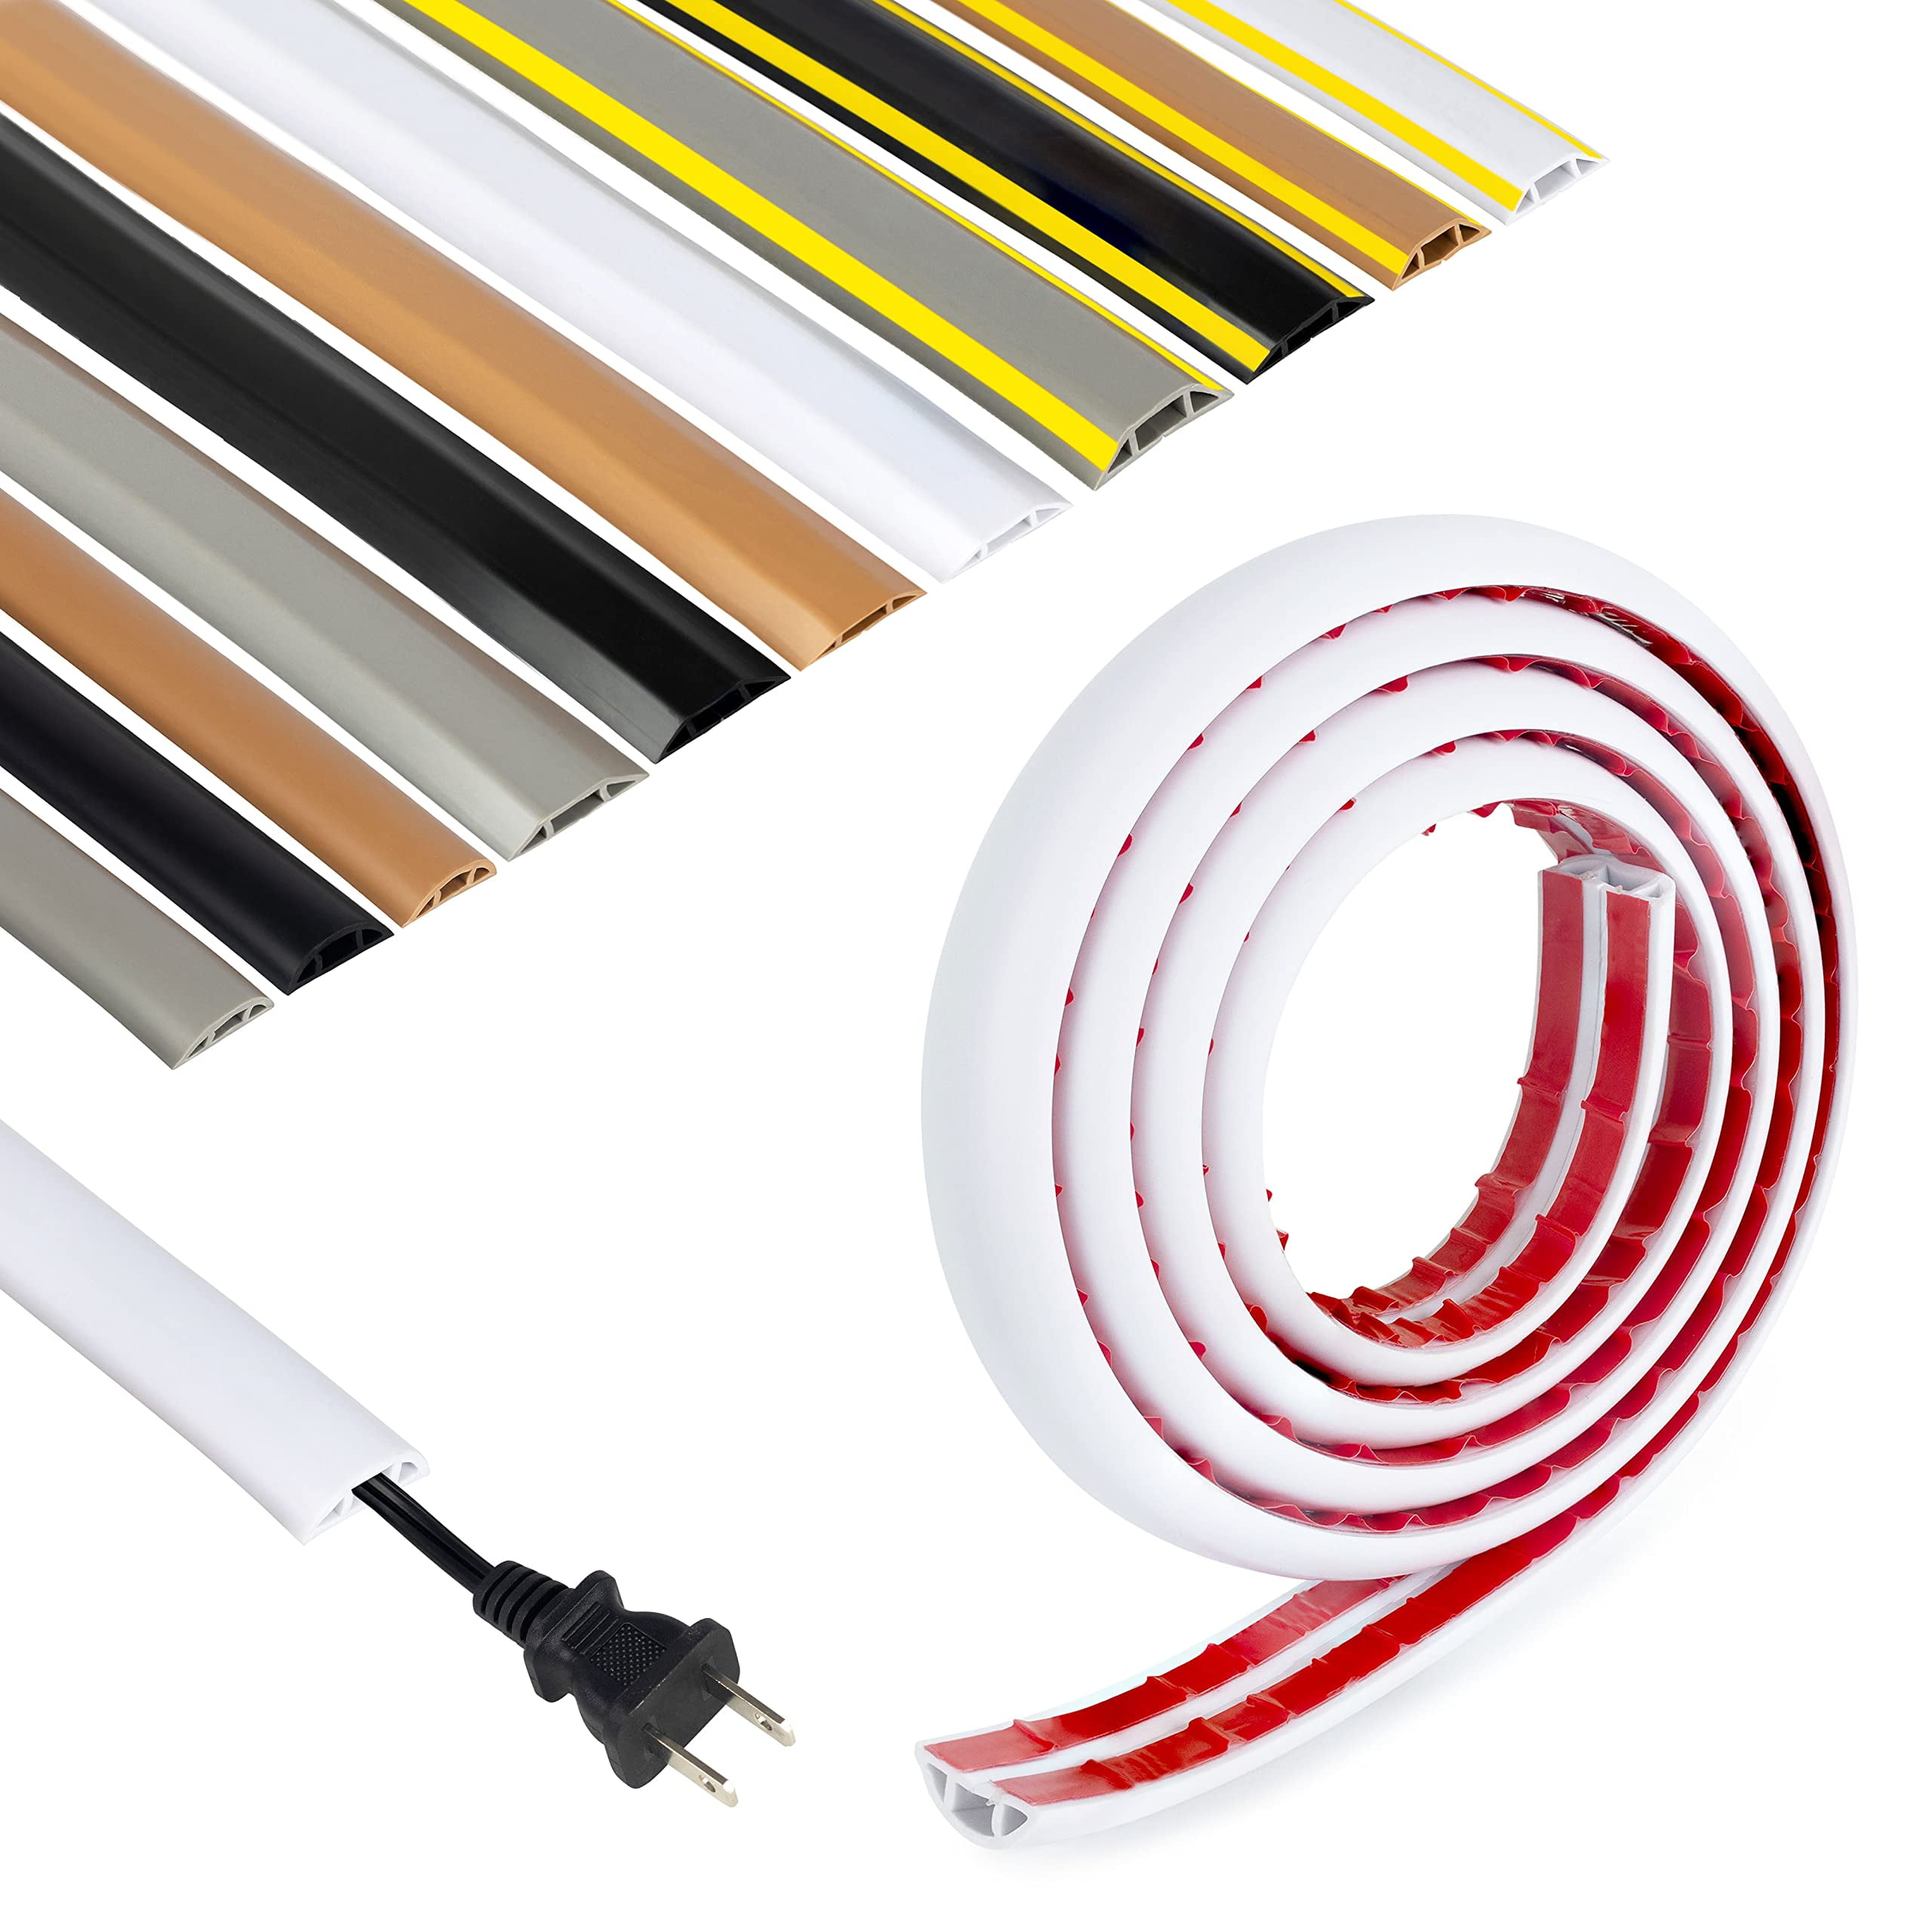 4FT Cord Cover Floor, White Cord Hider Floor, Extension Cable Cover Power  Cord Protector Floor, Cable Management Hide Cords on Floor- Soft PVC Wire